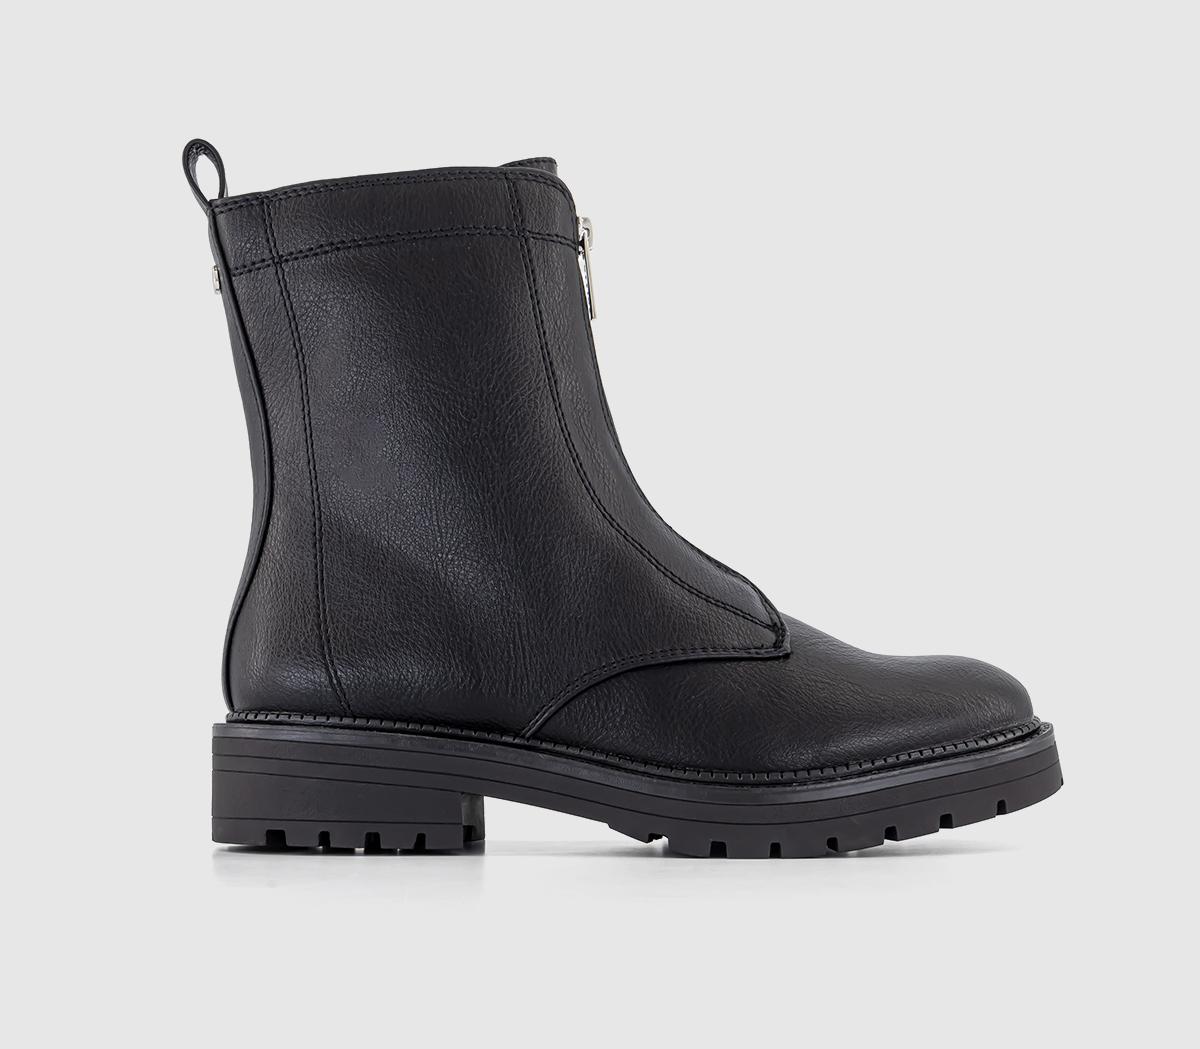 OFFICE Agenda Zip Front Cleated Boots Black - Women's Ankle Boots